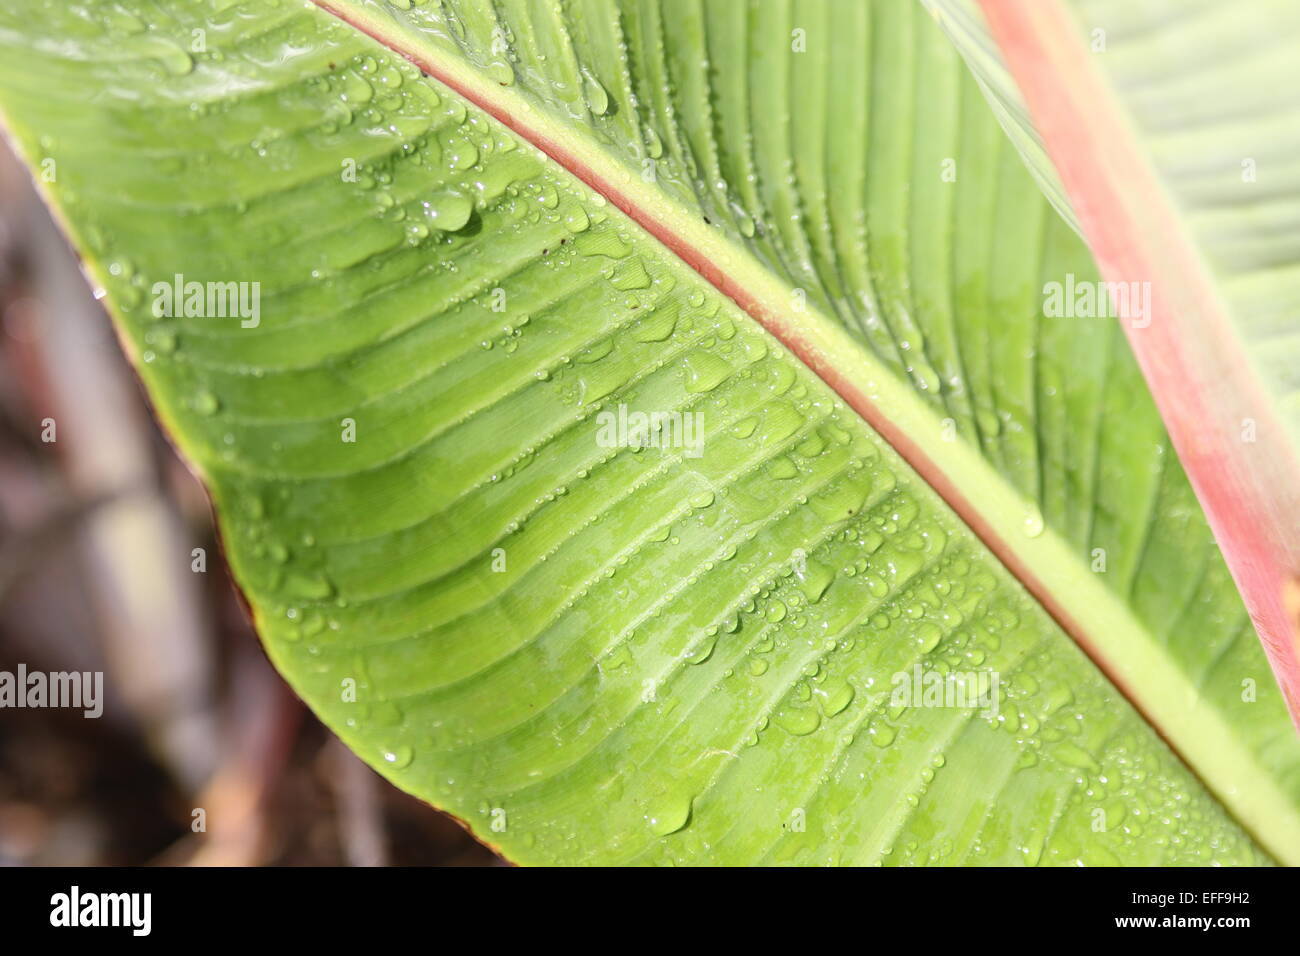 Ensete ventricosum, abyssinian banana palm leaves after rain Stock Photo